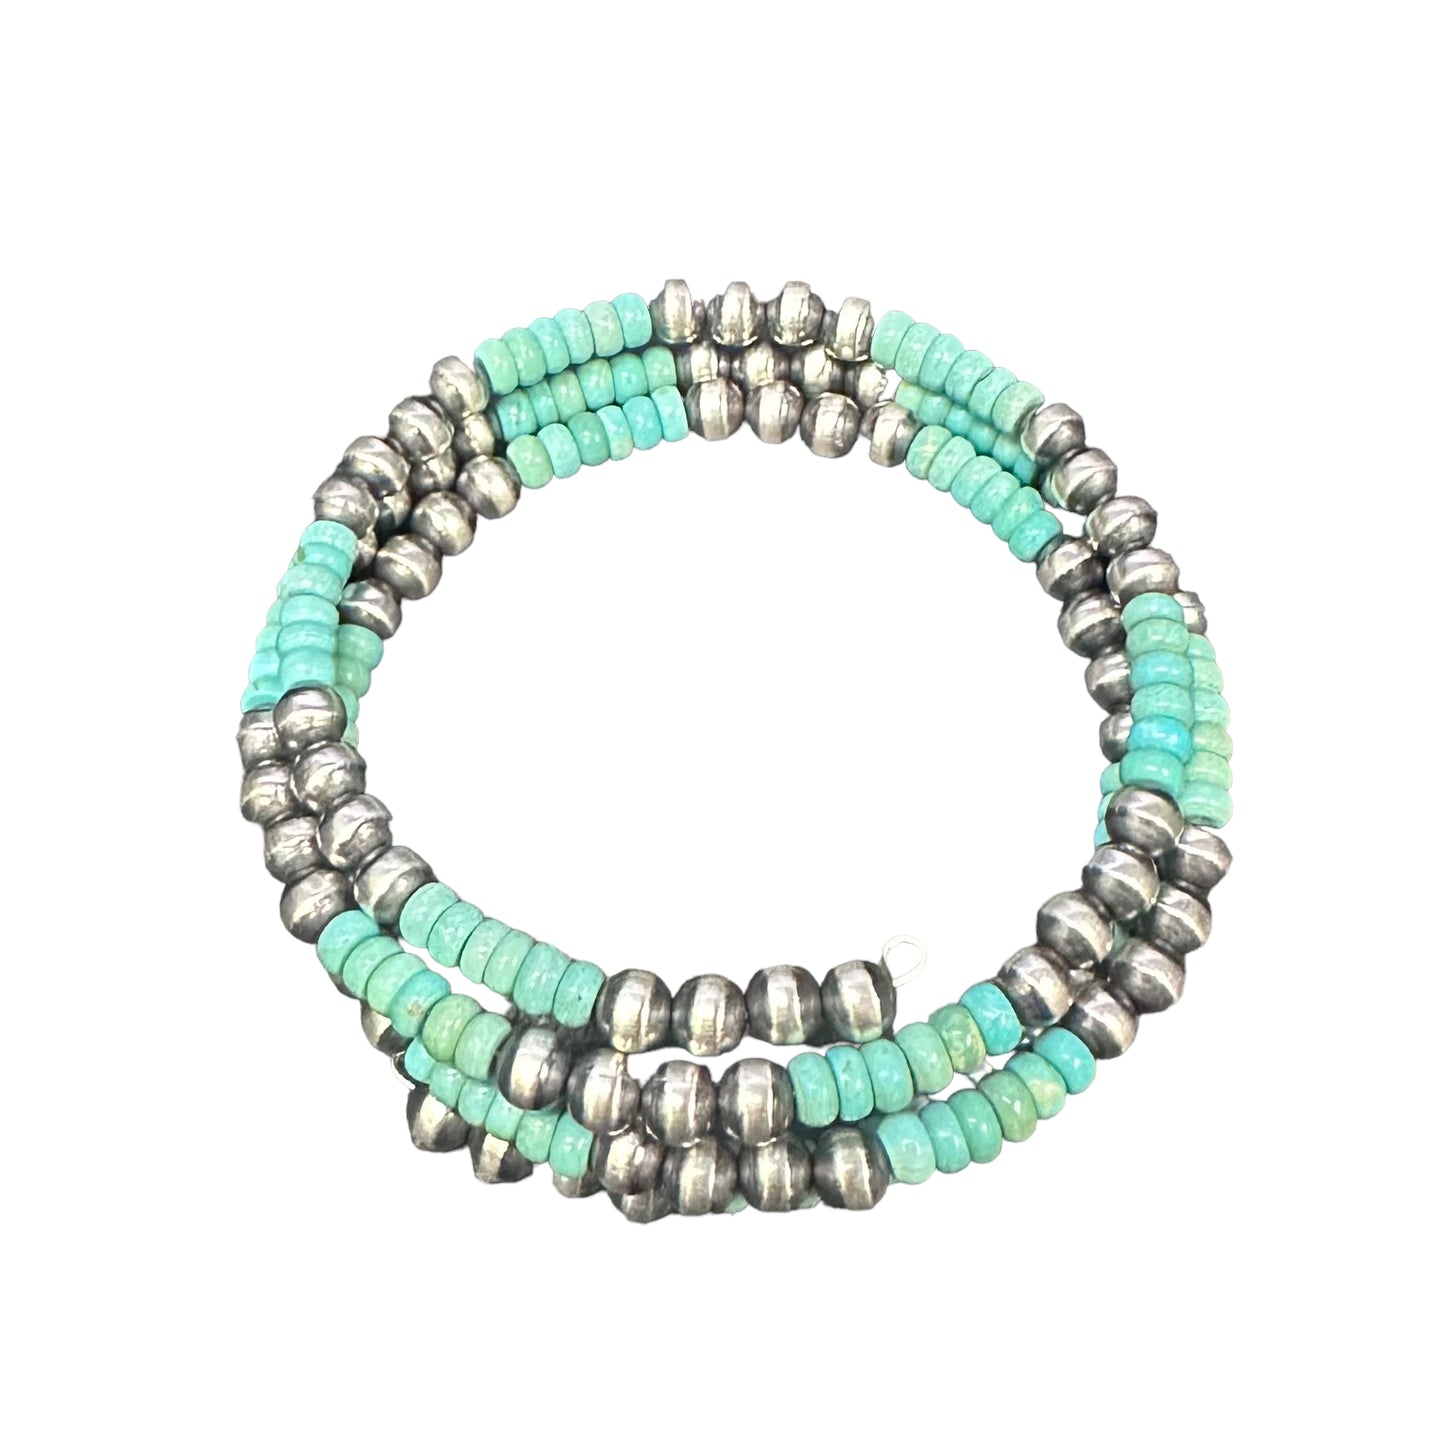 Turquoise Navajo Pearl Oxidized Bead Wrap Bracelet Sterling Silver